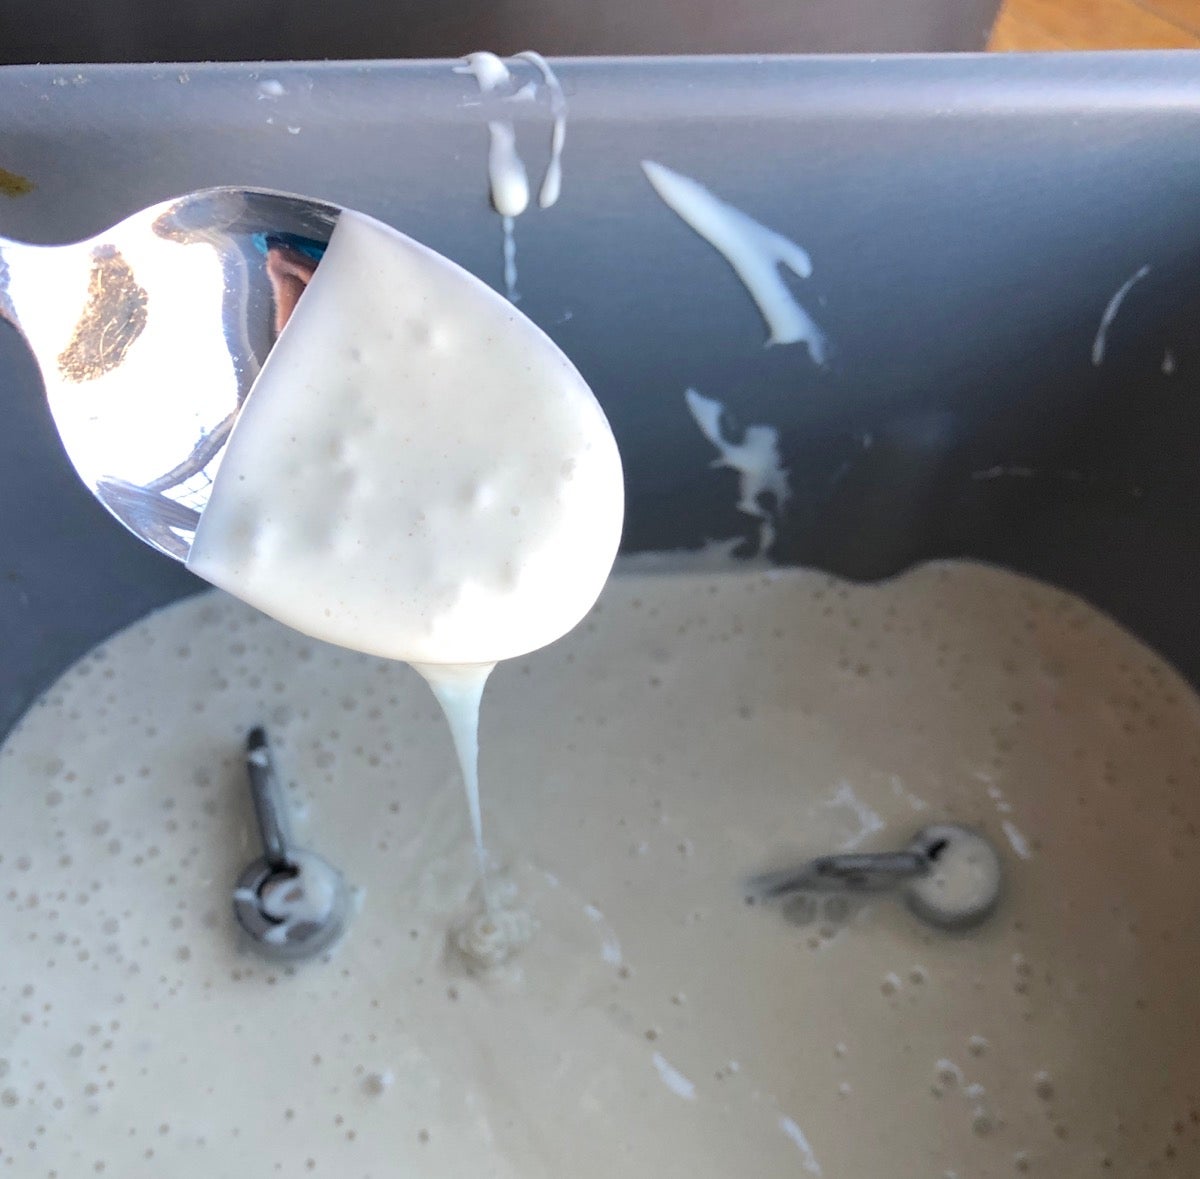 Sourdough starter dripping from a spoon into a bread machine bucket.